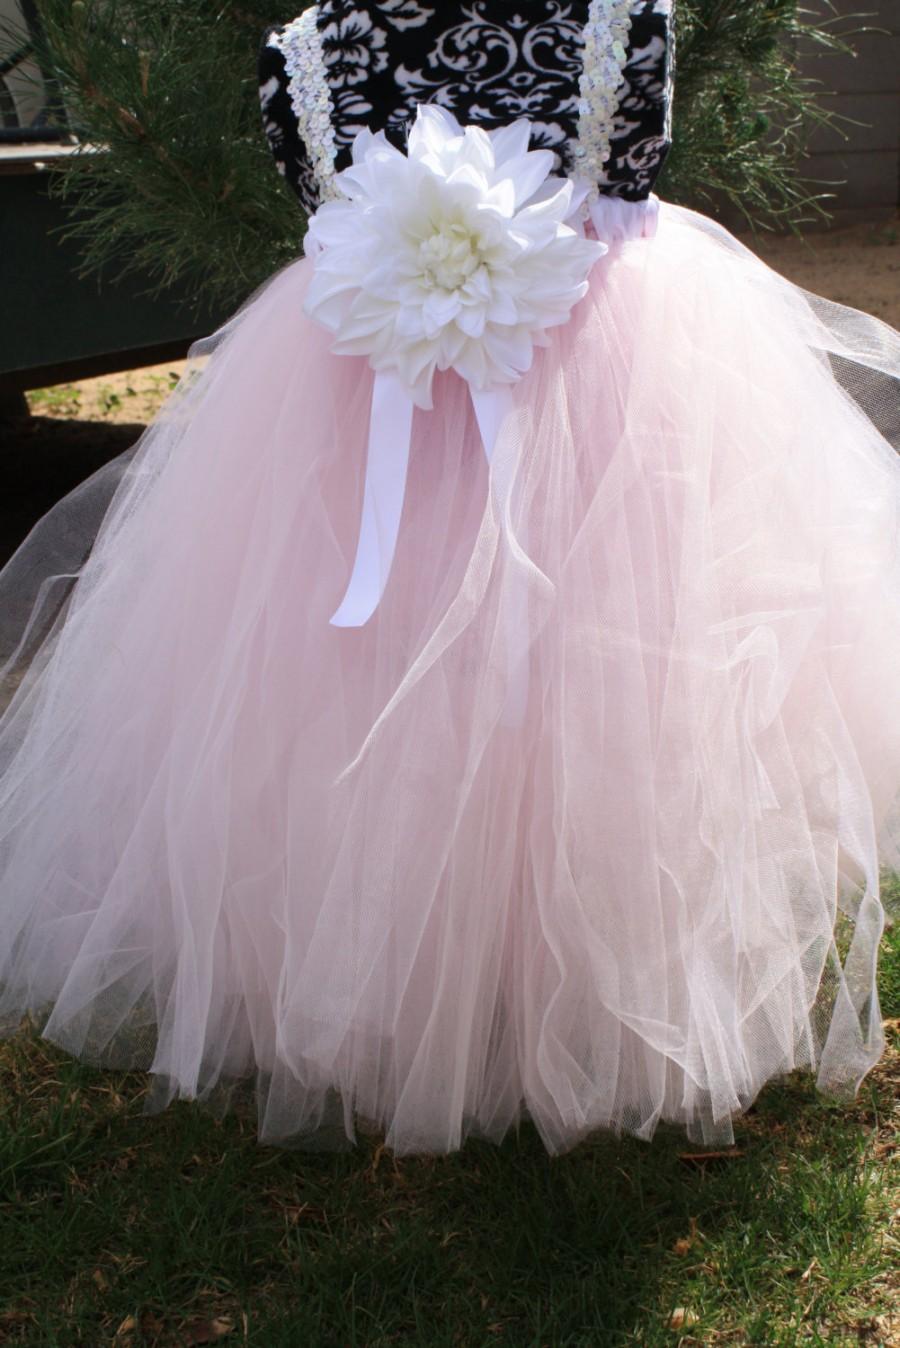 Mariage - Pink Flower girl dress "Cotton Candy" Weddings, easter, photoprop, birthday, pageant SEWN tutu, tulle dress